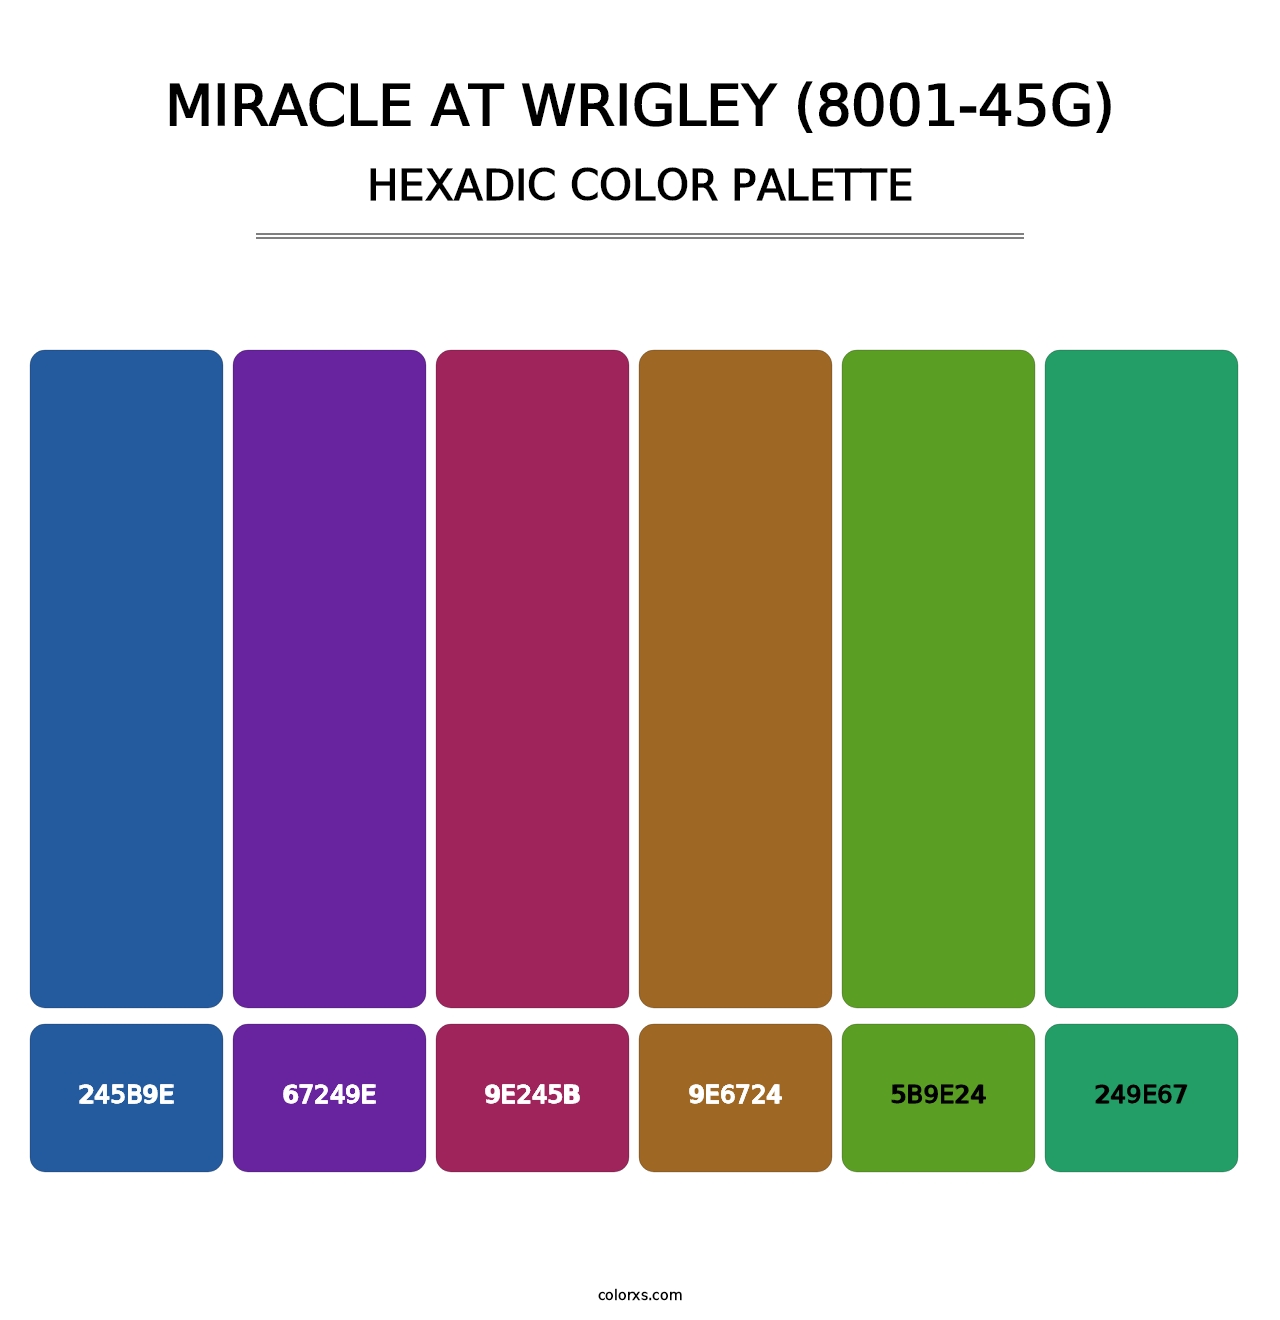 Miracle at Wrigley (8001-45G) - Hexadic Color Palette